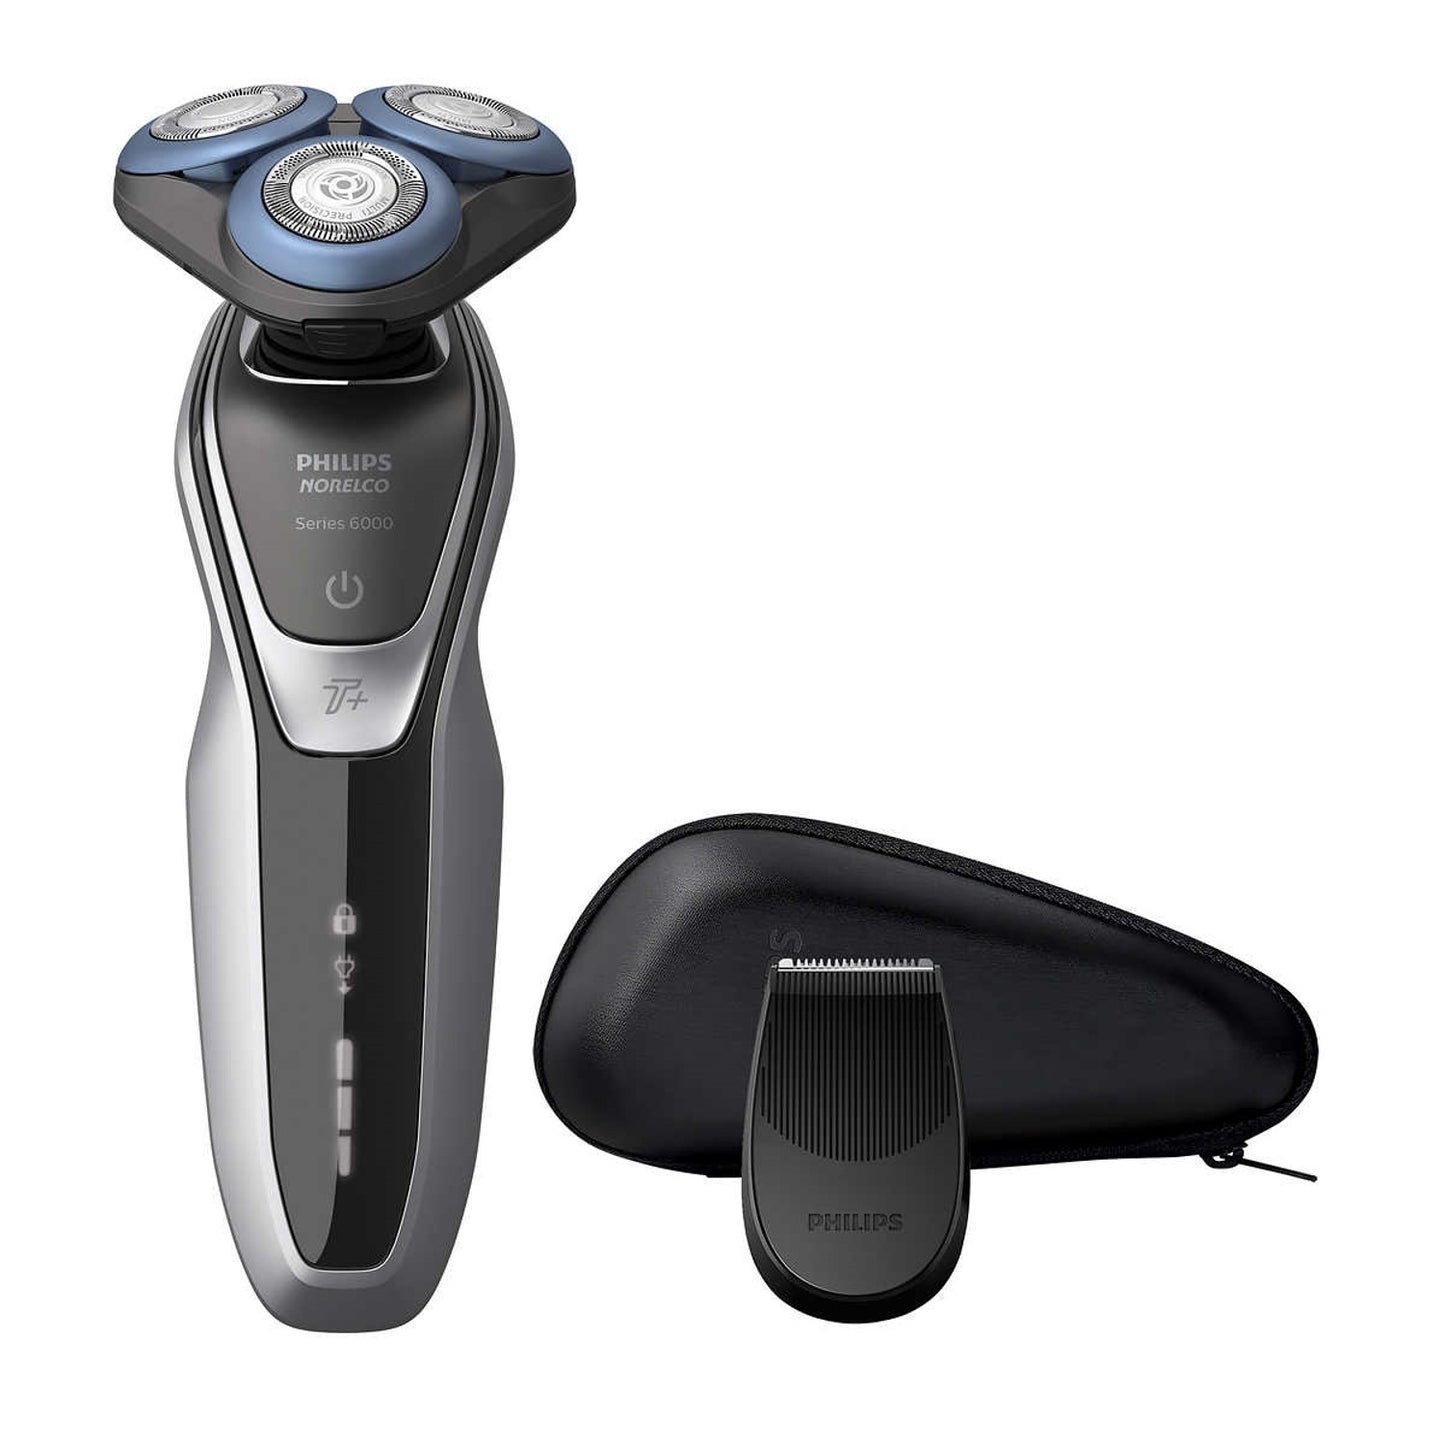 Philips Norelco Shaver 6500 Clean Shave Wet & Dry Reduce Skin Irritation Flex